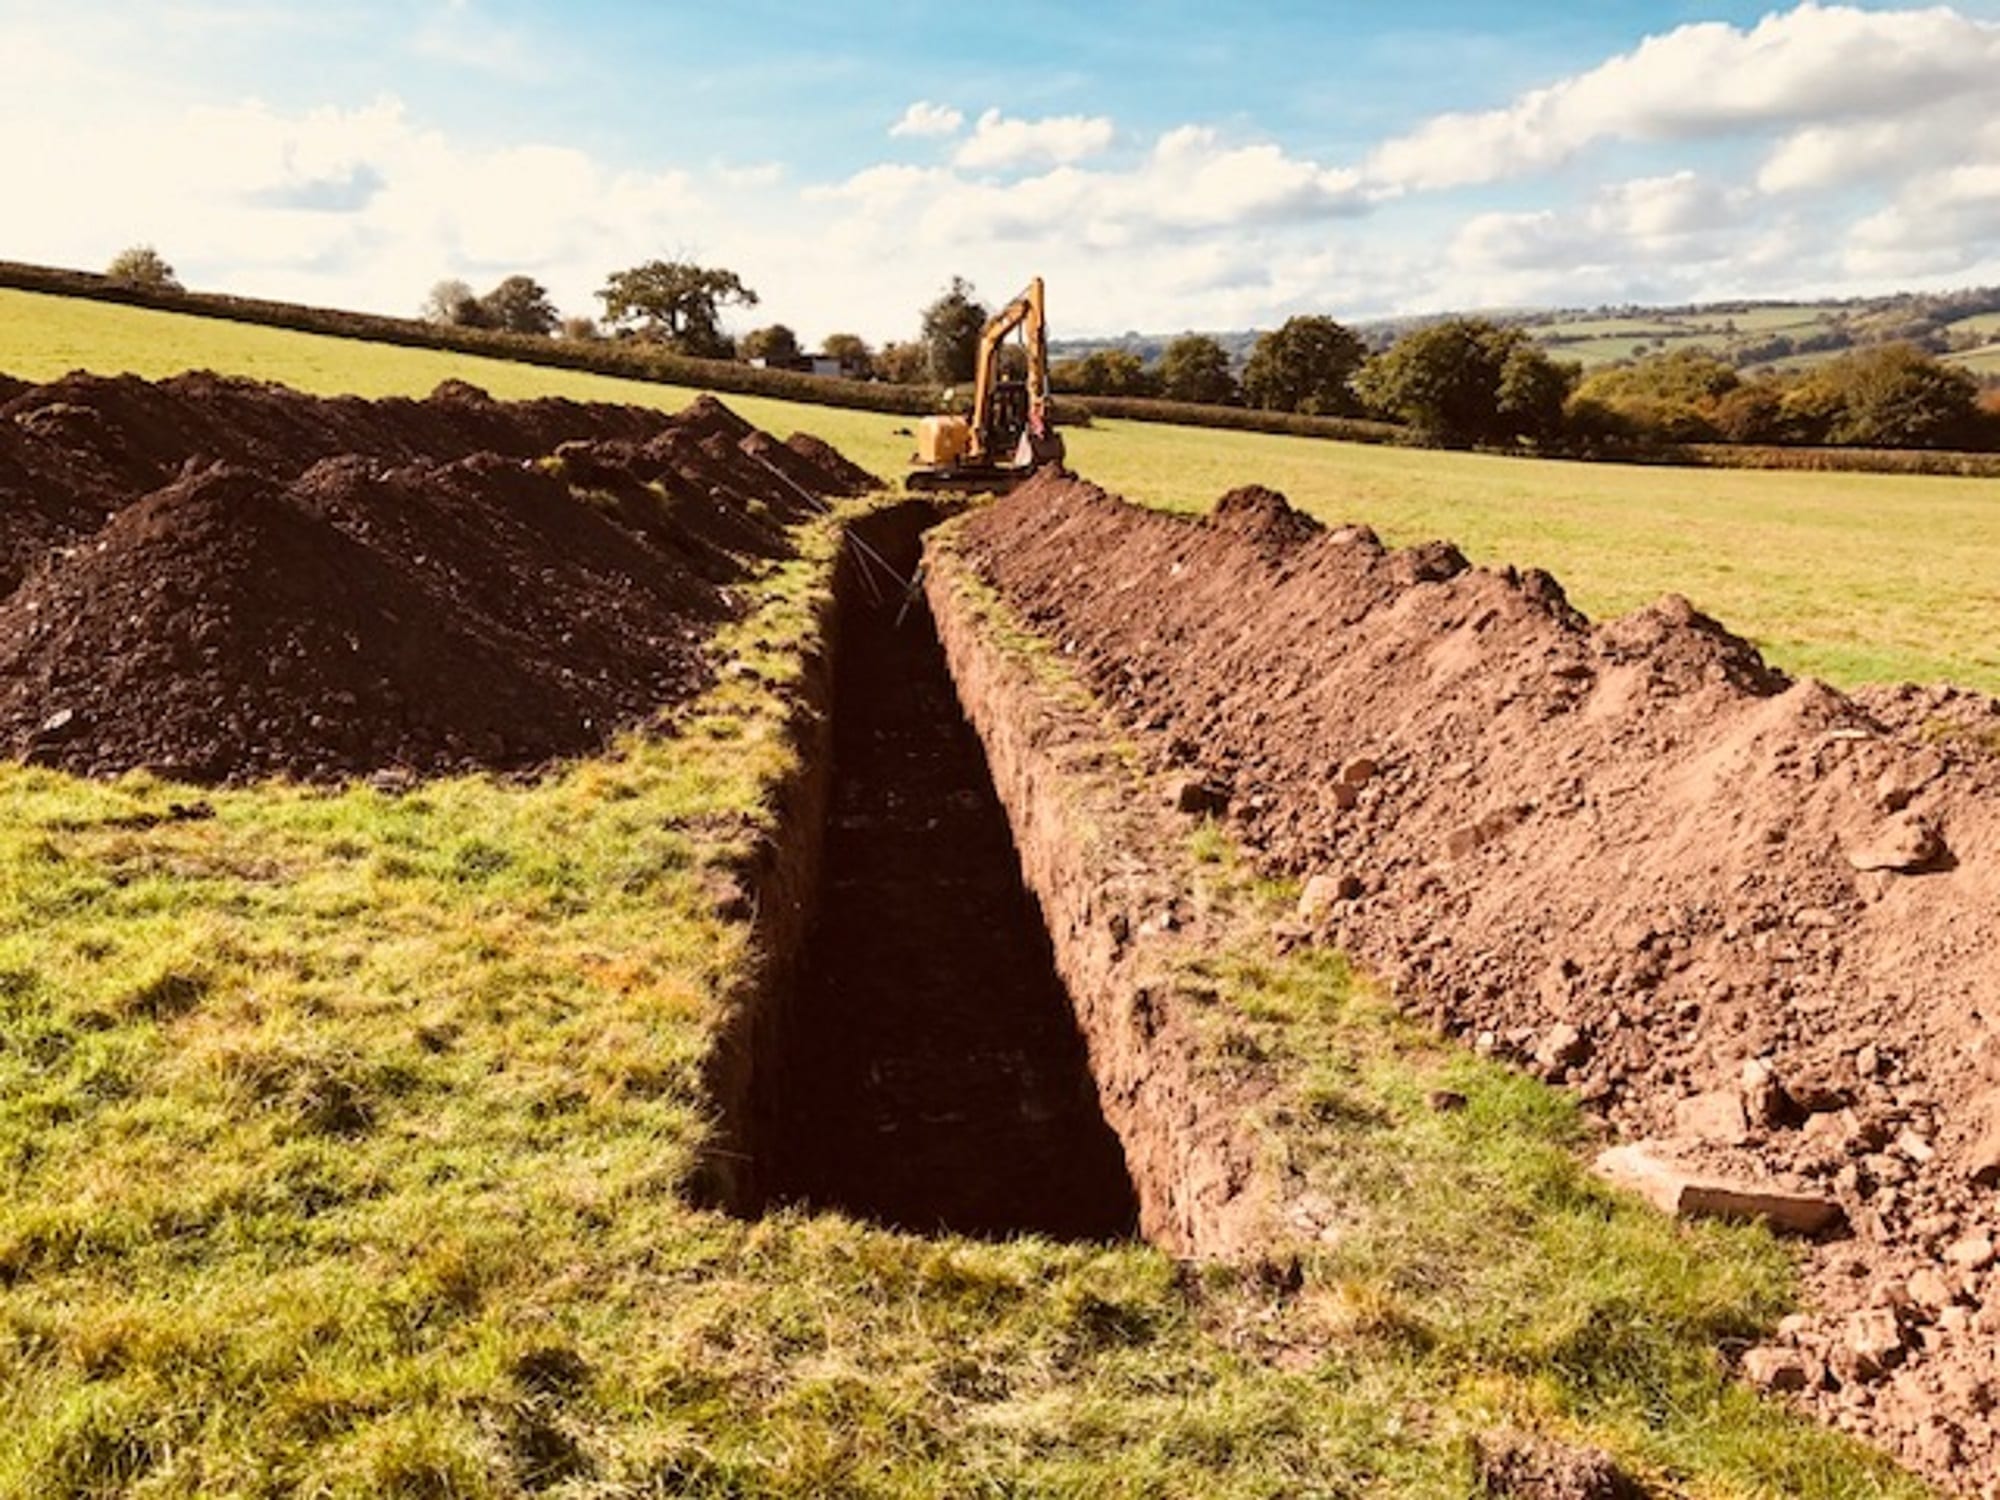 Clifford Place ground source heat pump case study: slinky trench being dug